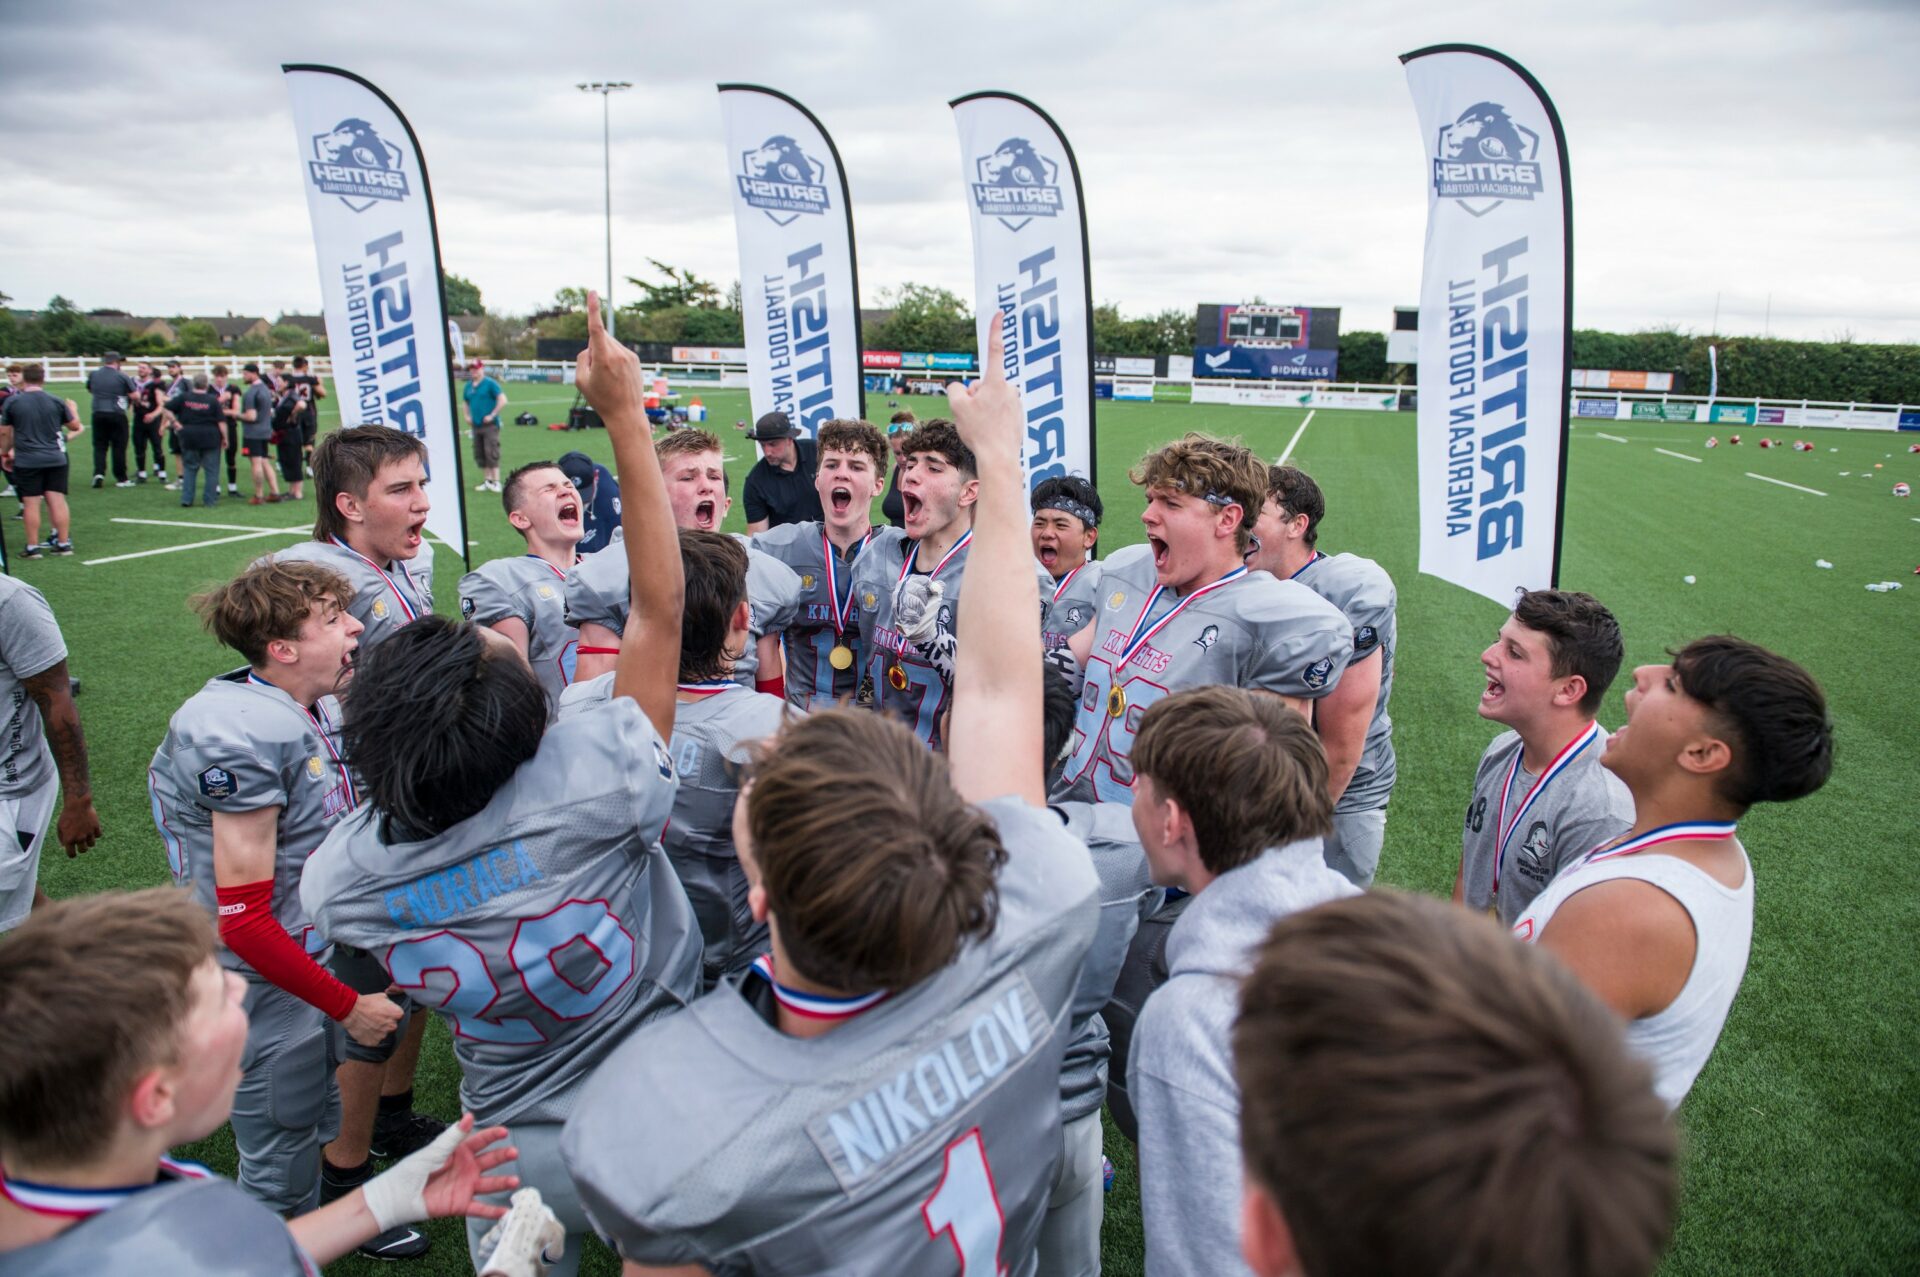 U16 Playoffs Set to Showcase Top Performing Teams in the UK